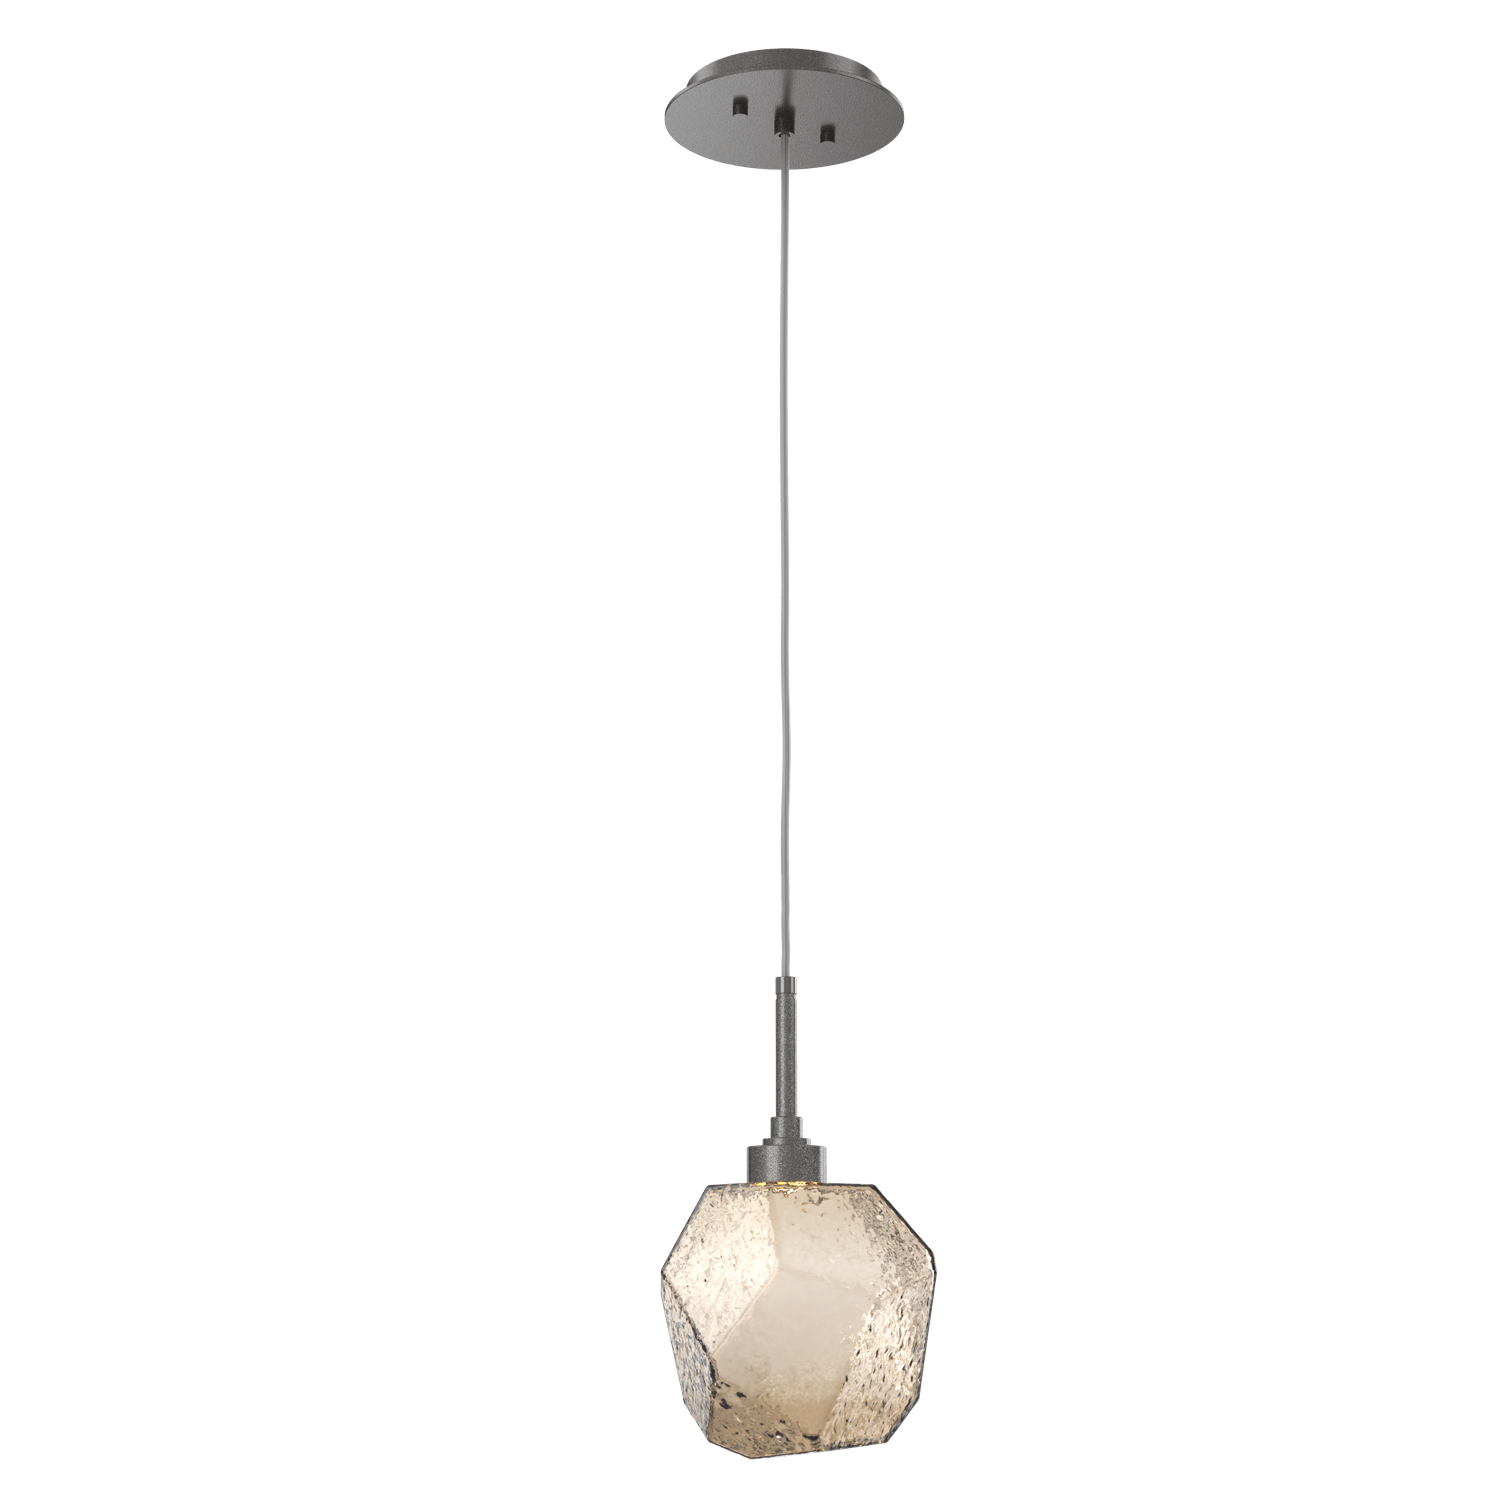 LAB0039-01-GP-B-Hammerton-Studio-Gem-pendant-light-with-graphite-finish-and-bronze-blown-glass-shades-and-LED-lamping